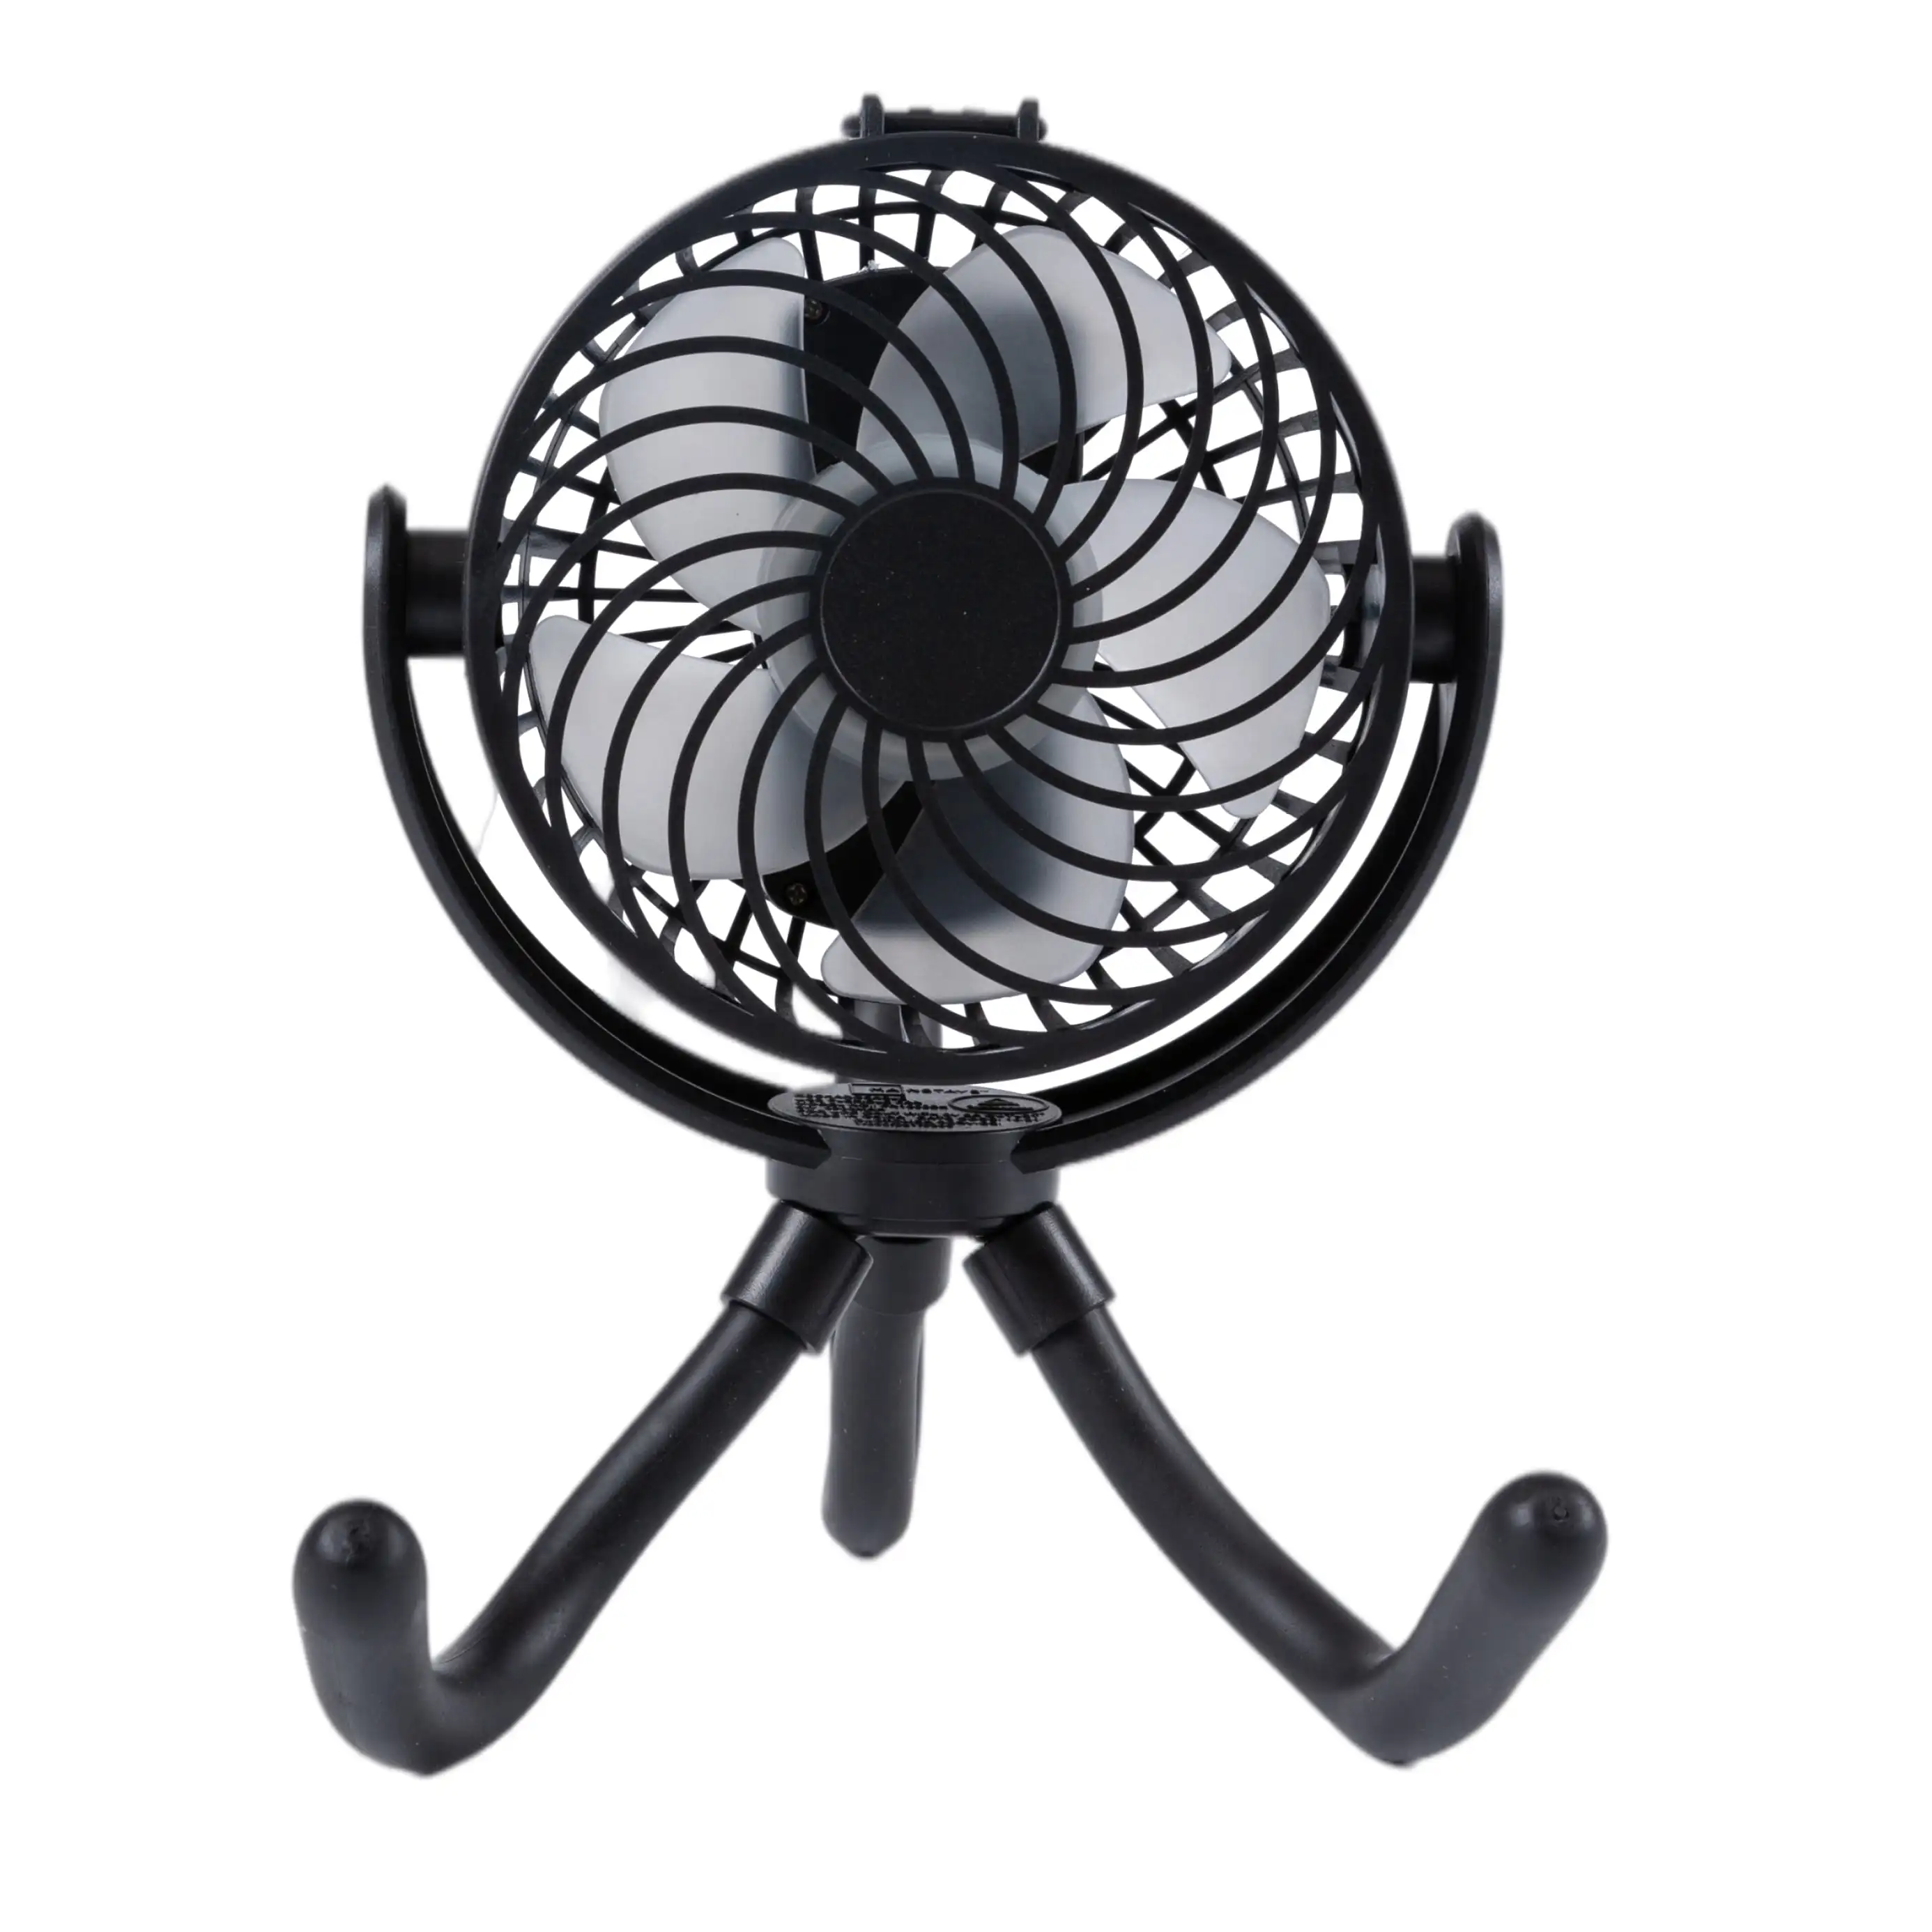 Mini On-the-go Rechargeable Personal Fan with Flexible tripod for Stroller, Car Seat, Treadmill, Black